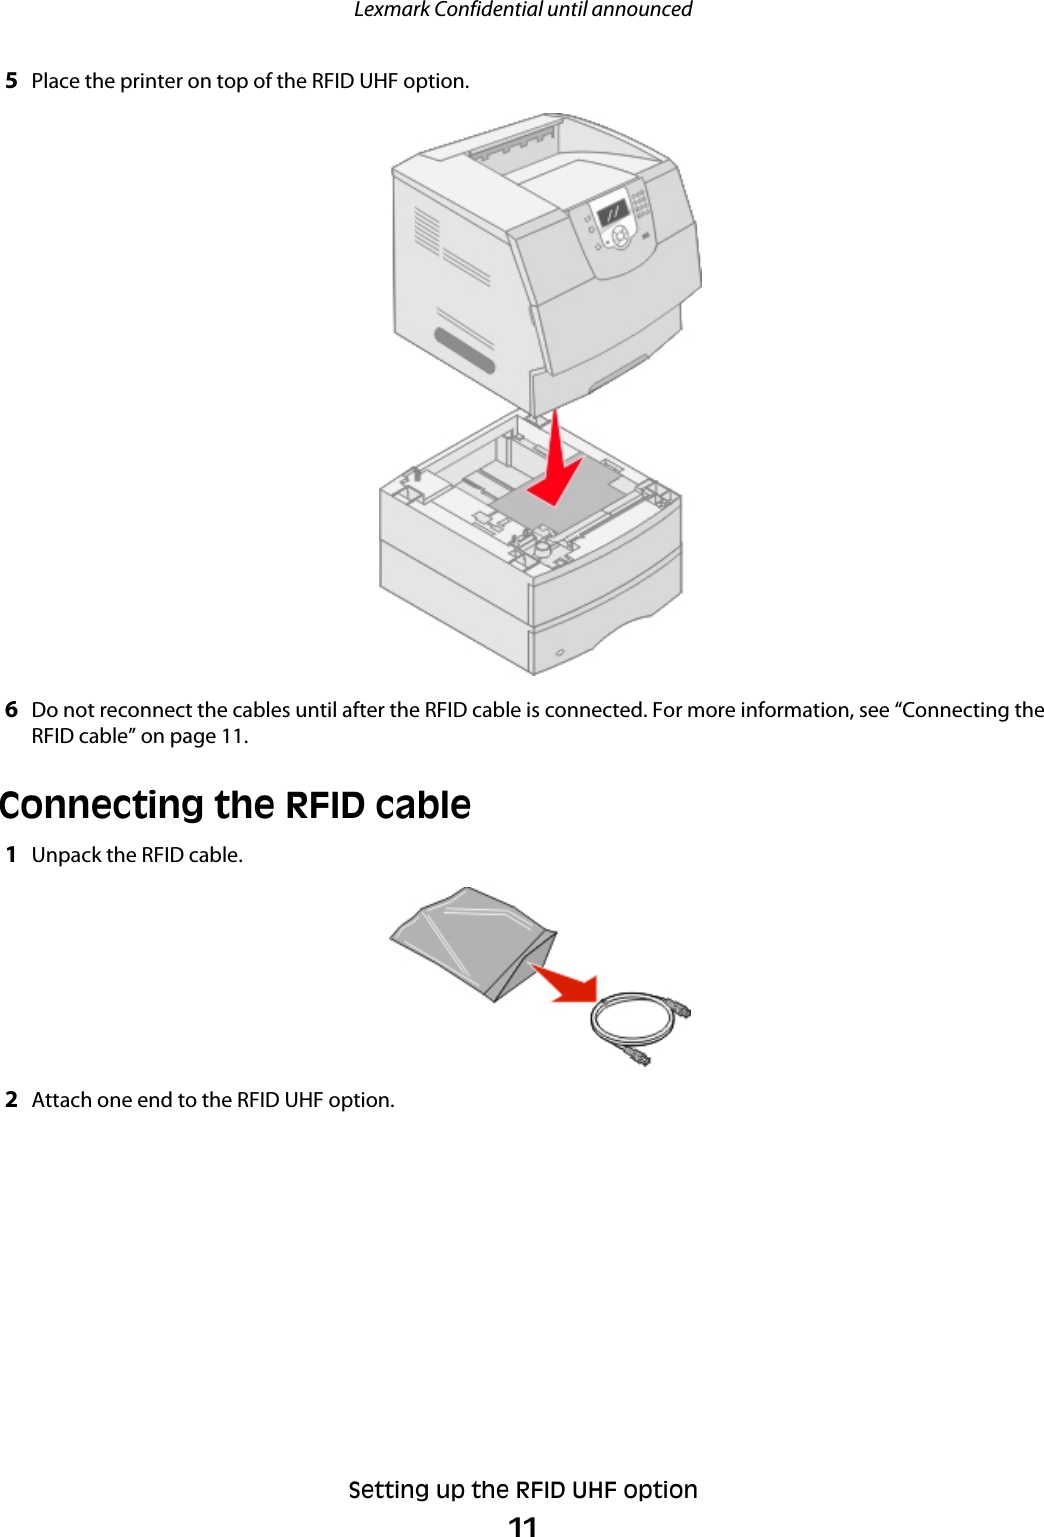 5Place the printer on top of the RFID UHF option.6Do not reconnect the cables until after the RFID cable is connected. For more information, see “Connecting theRFID cable” on page 11.Connecting the RFID cable1Unpack the RFID cable.2Attach one end to the RFID UHF option.Lexmark Confidential until announcedSetting up the RFID UHF option11